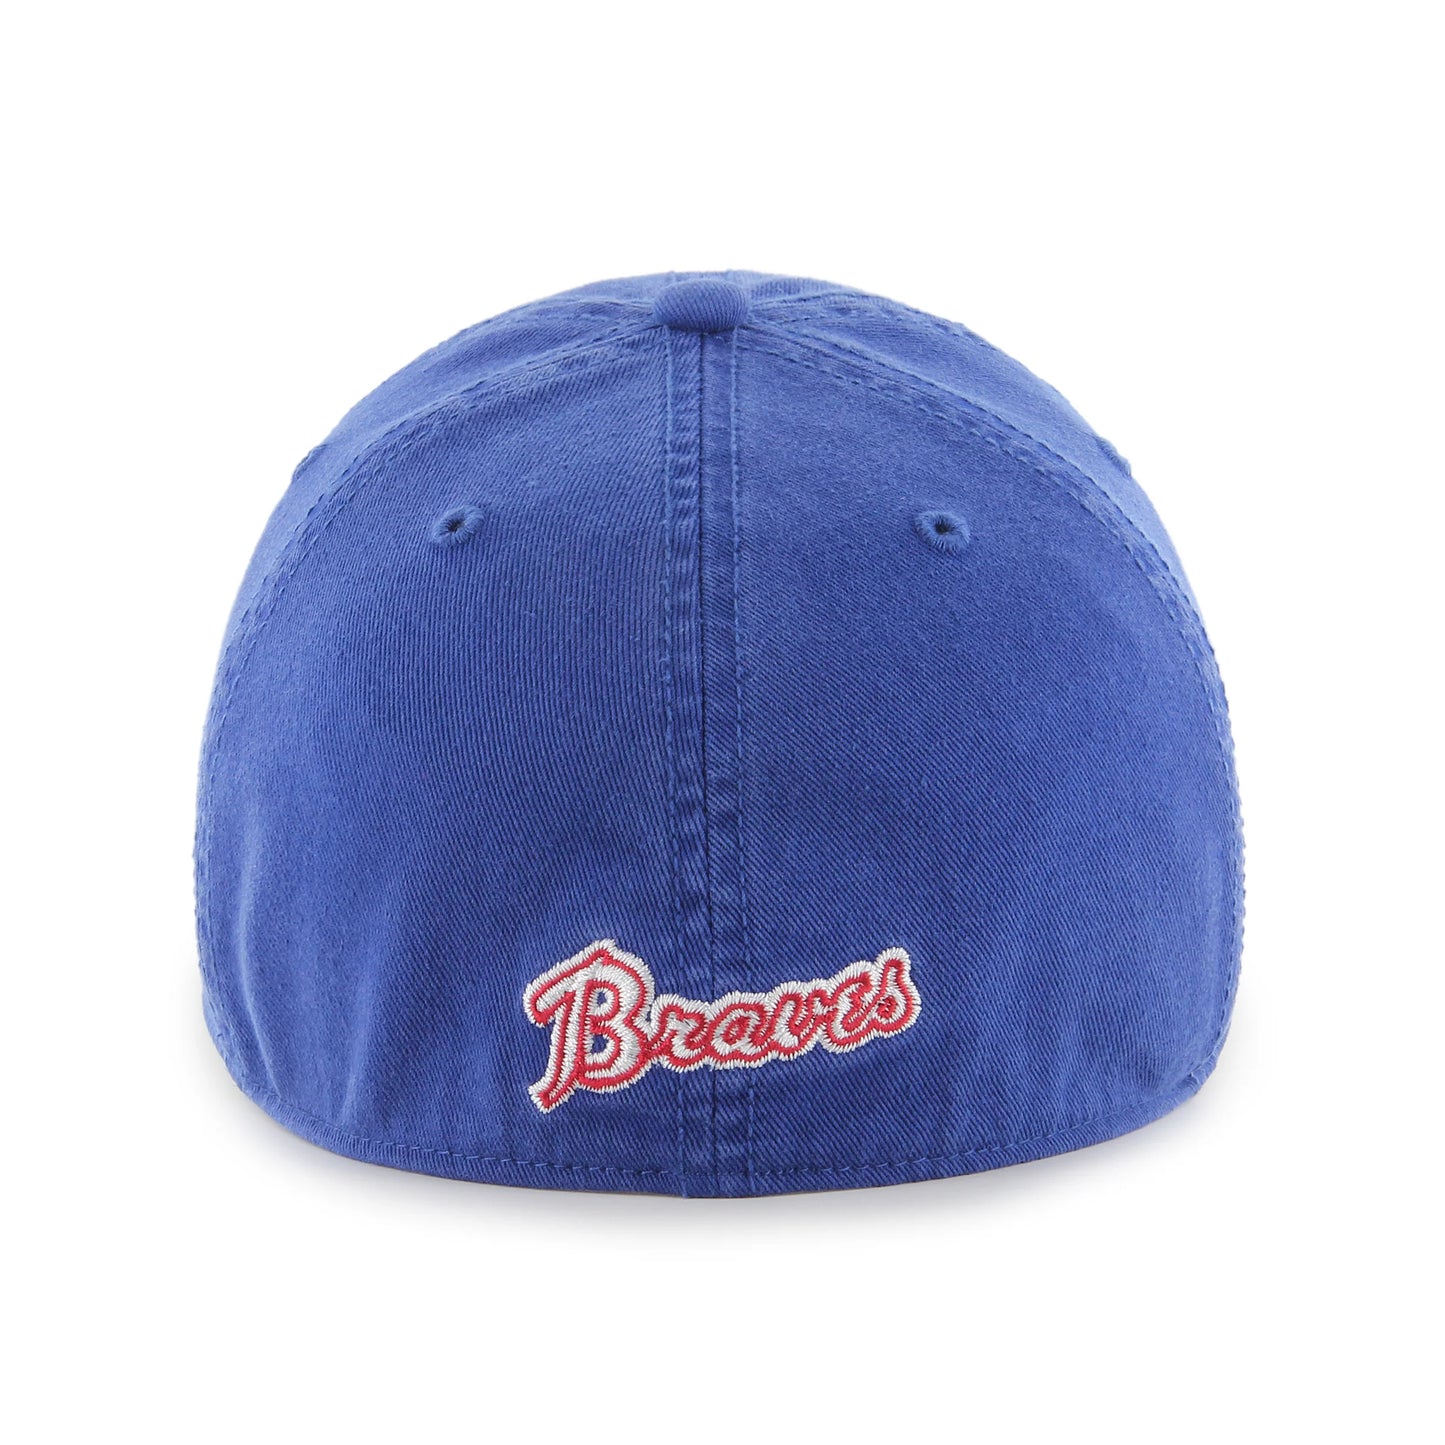 Atlanta Braves Cooperstown Fitted Cap